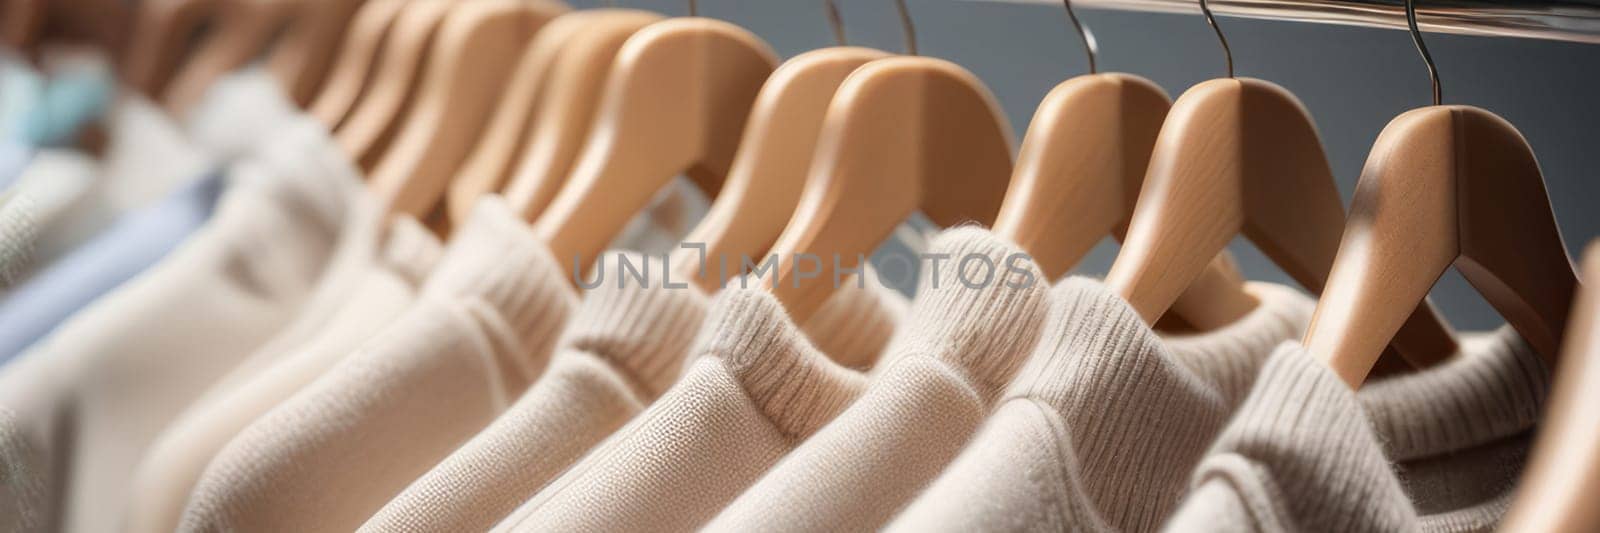 Pastel beige sweaters on hangers in a store. by Annu1tochka